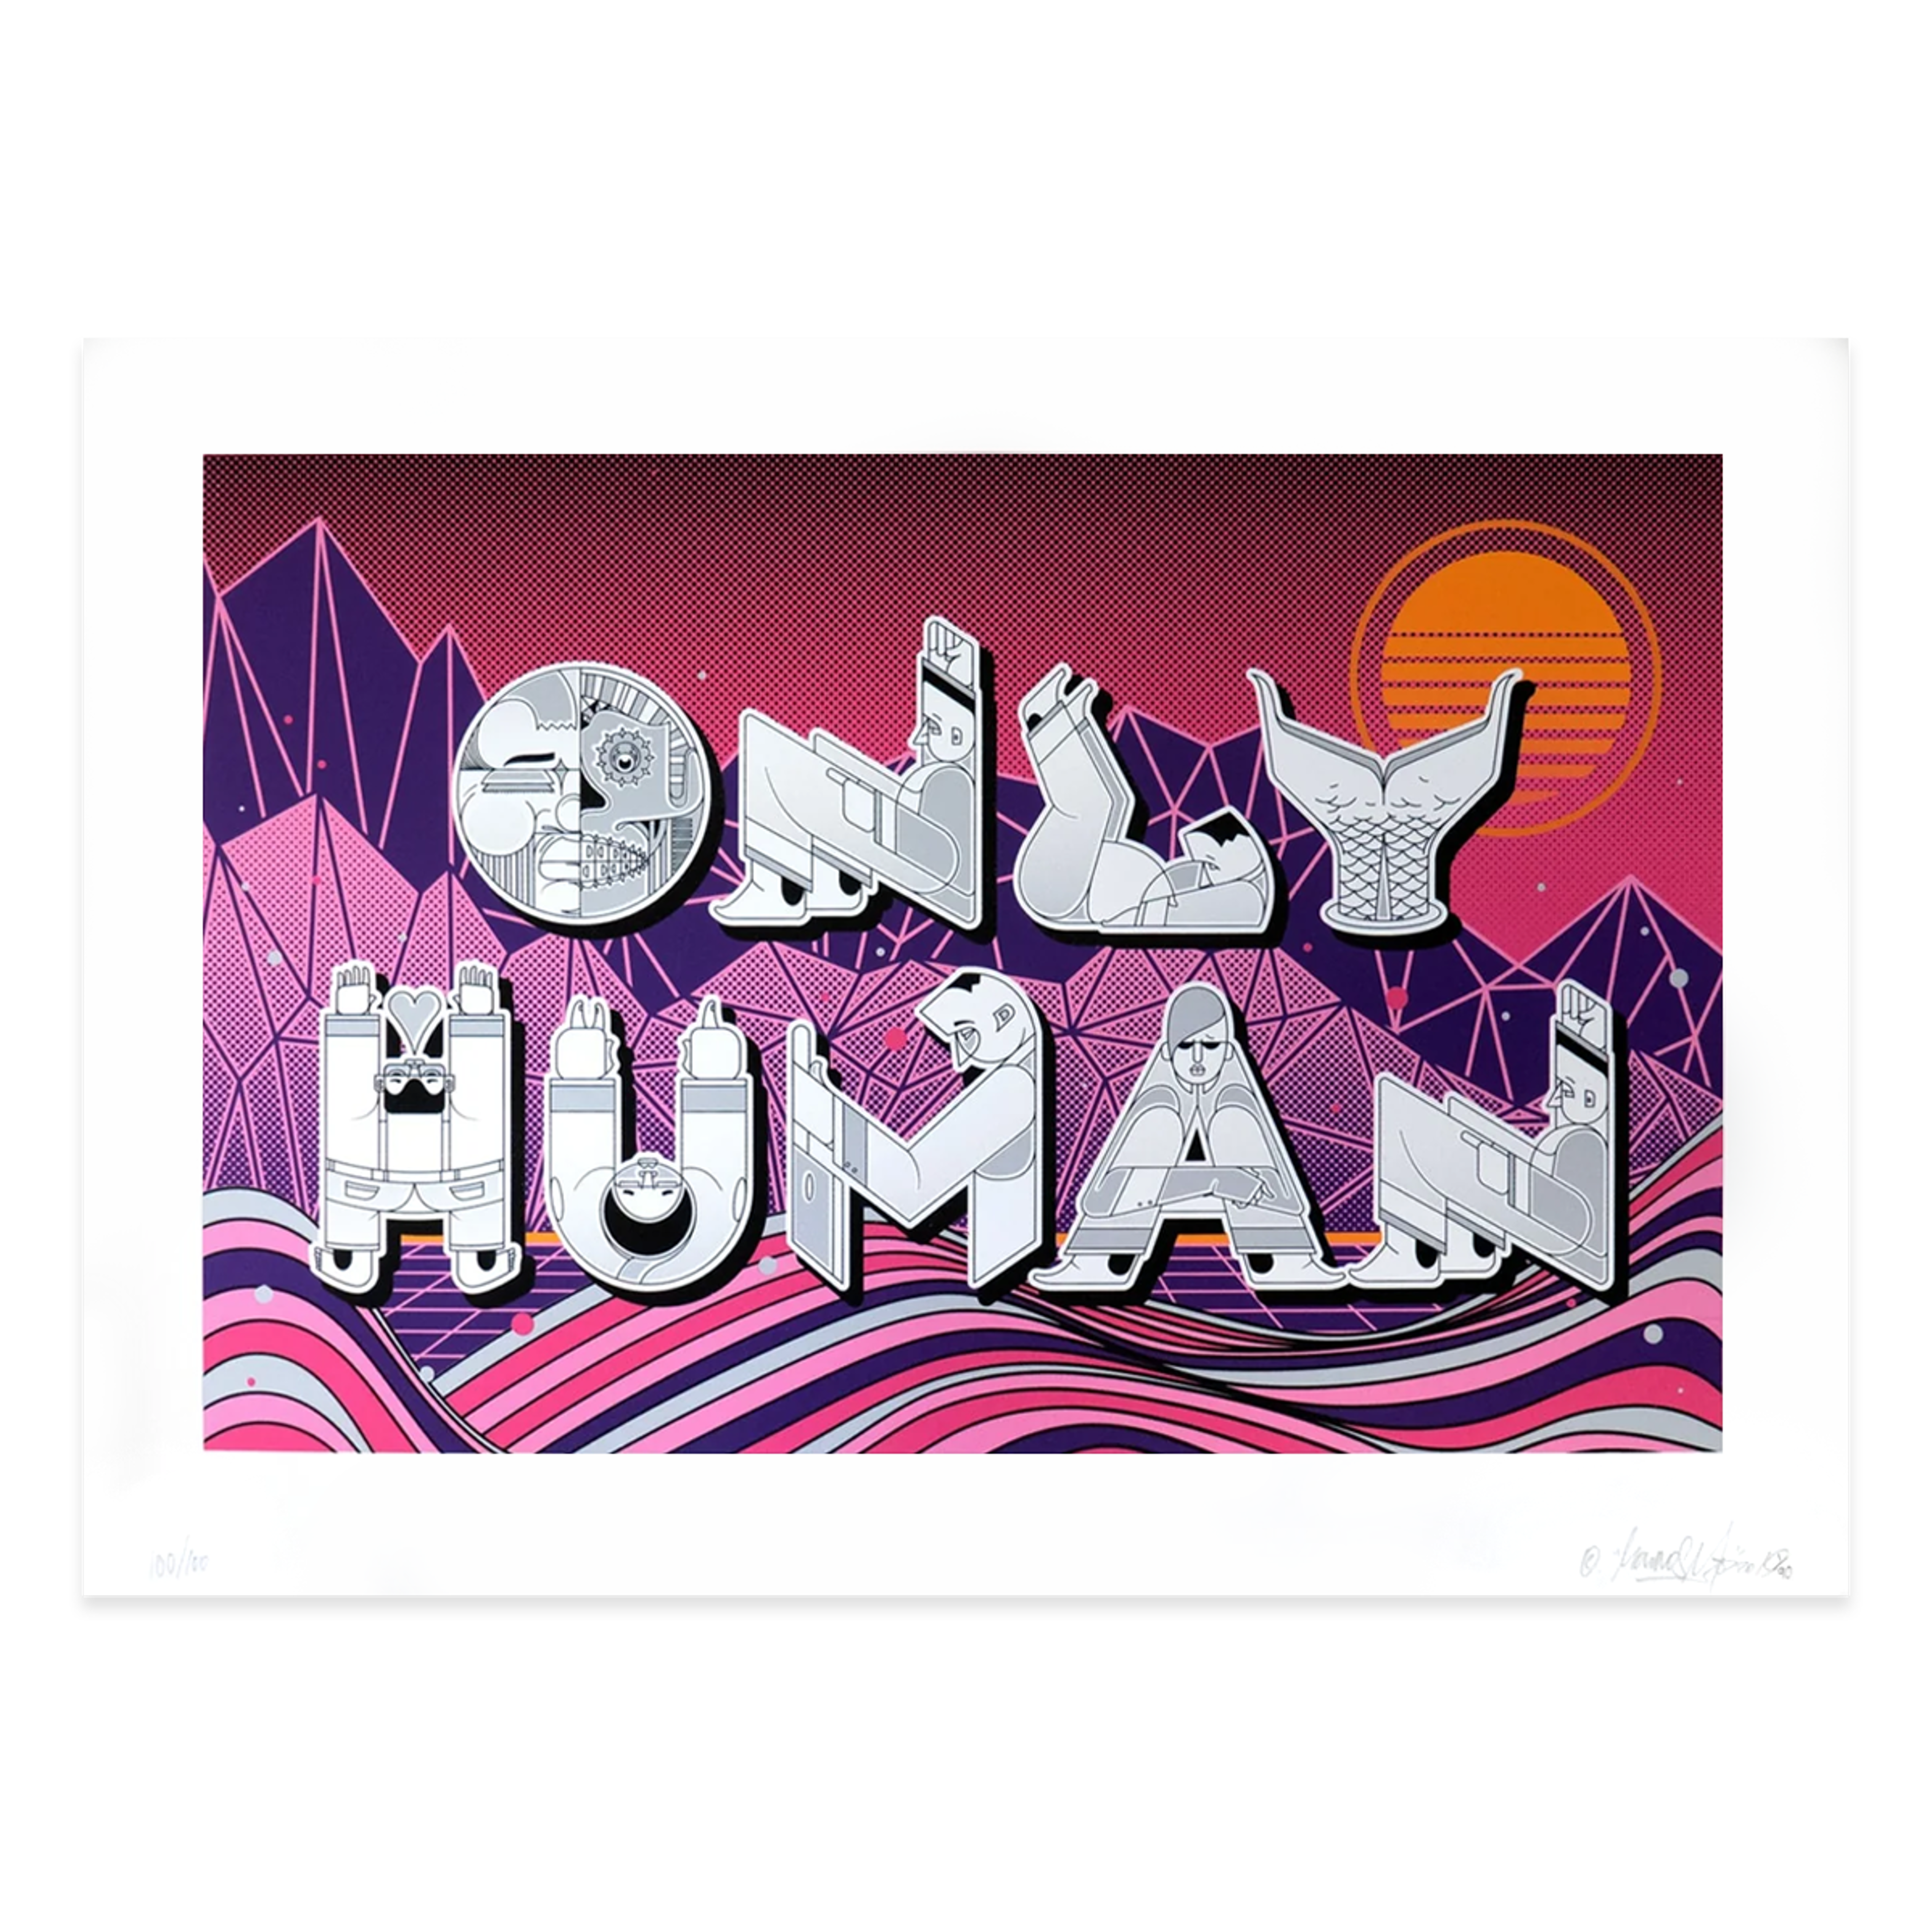 Only Human (Main edition)